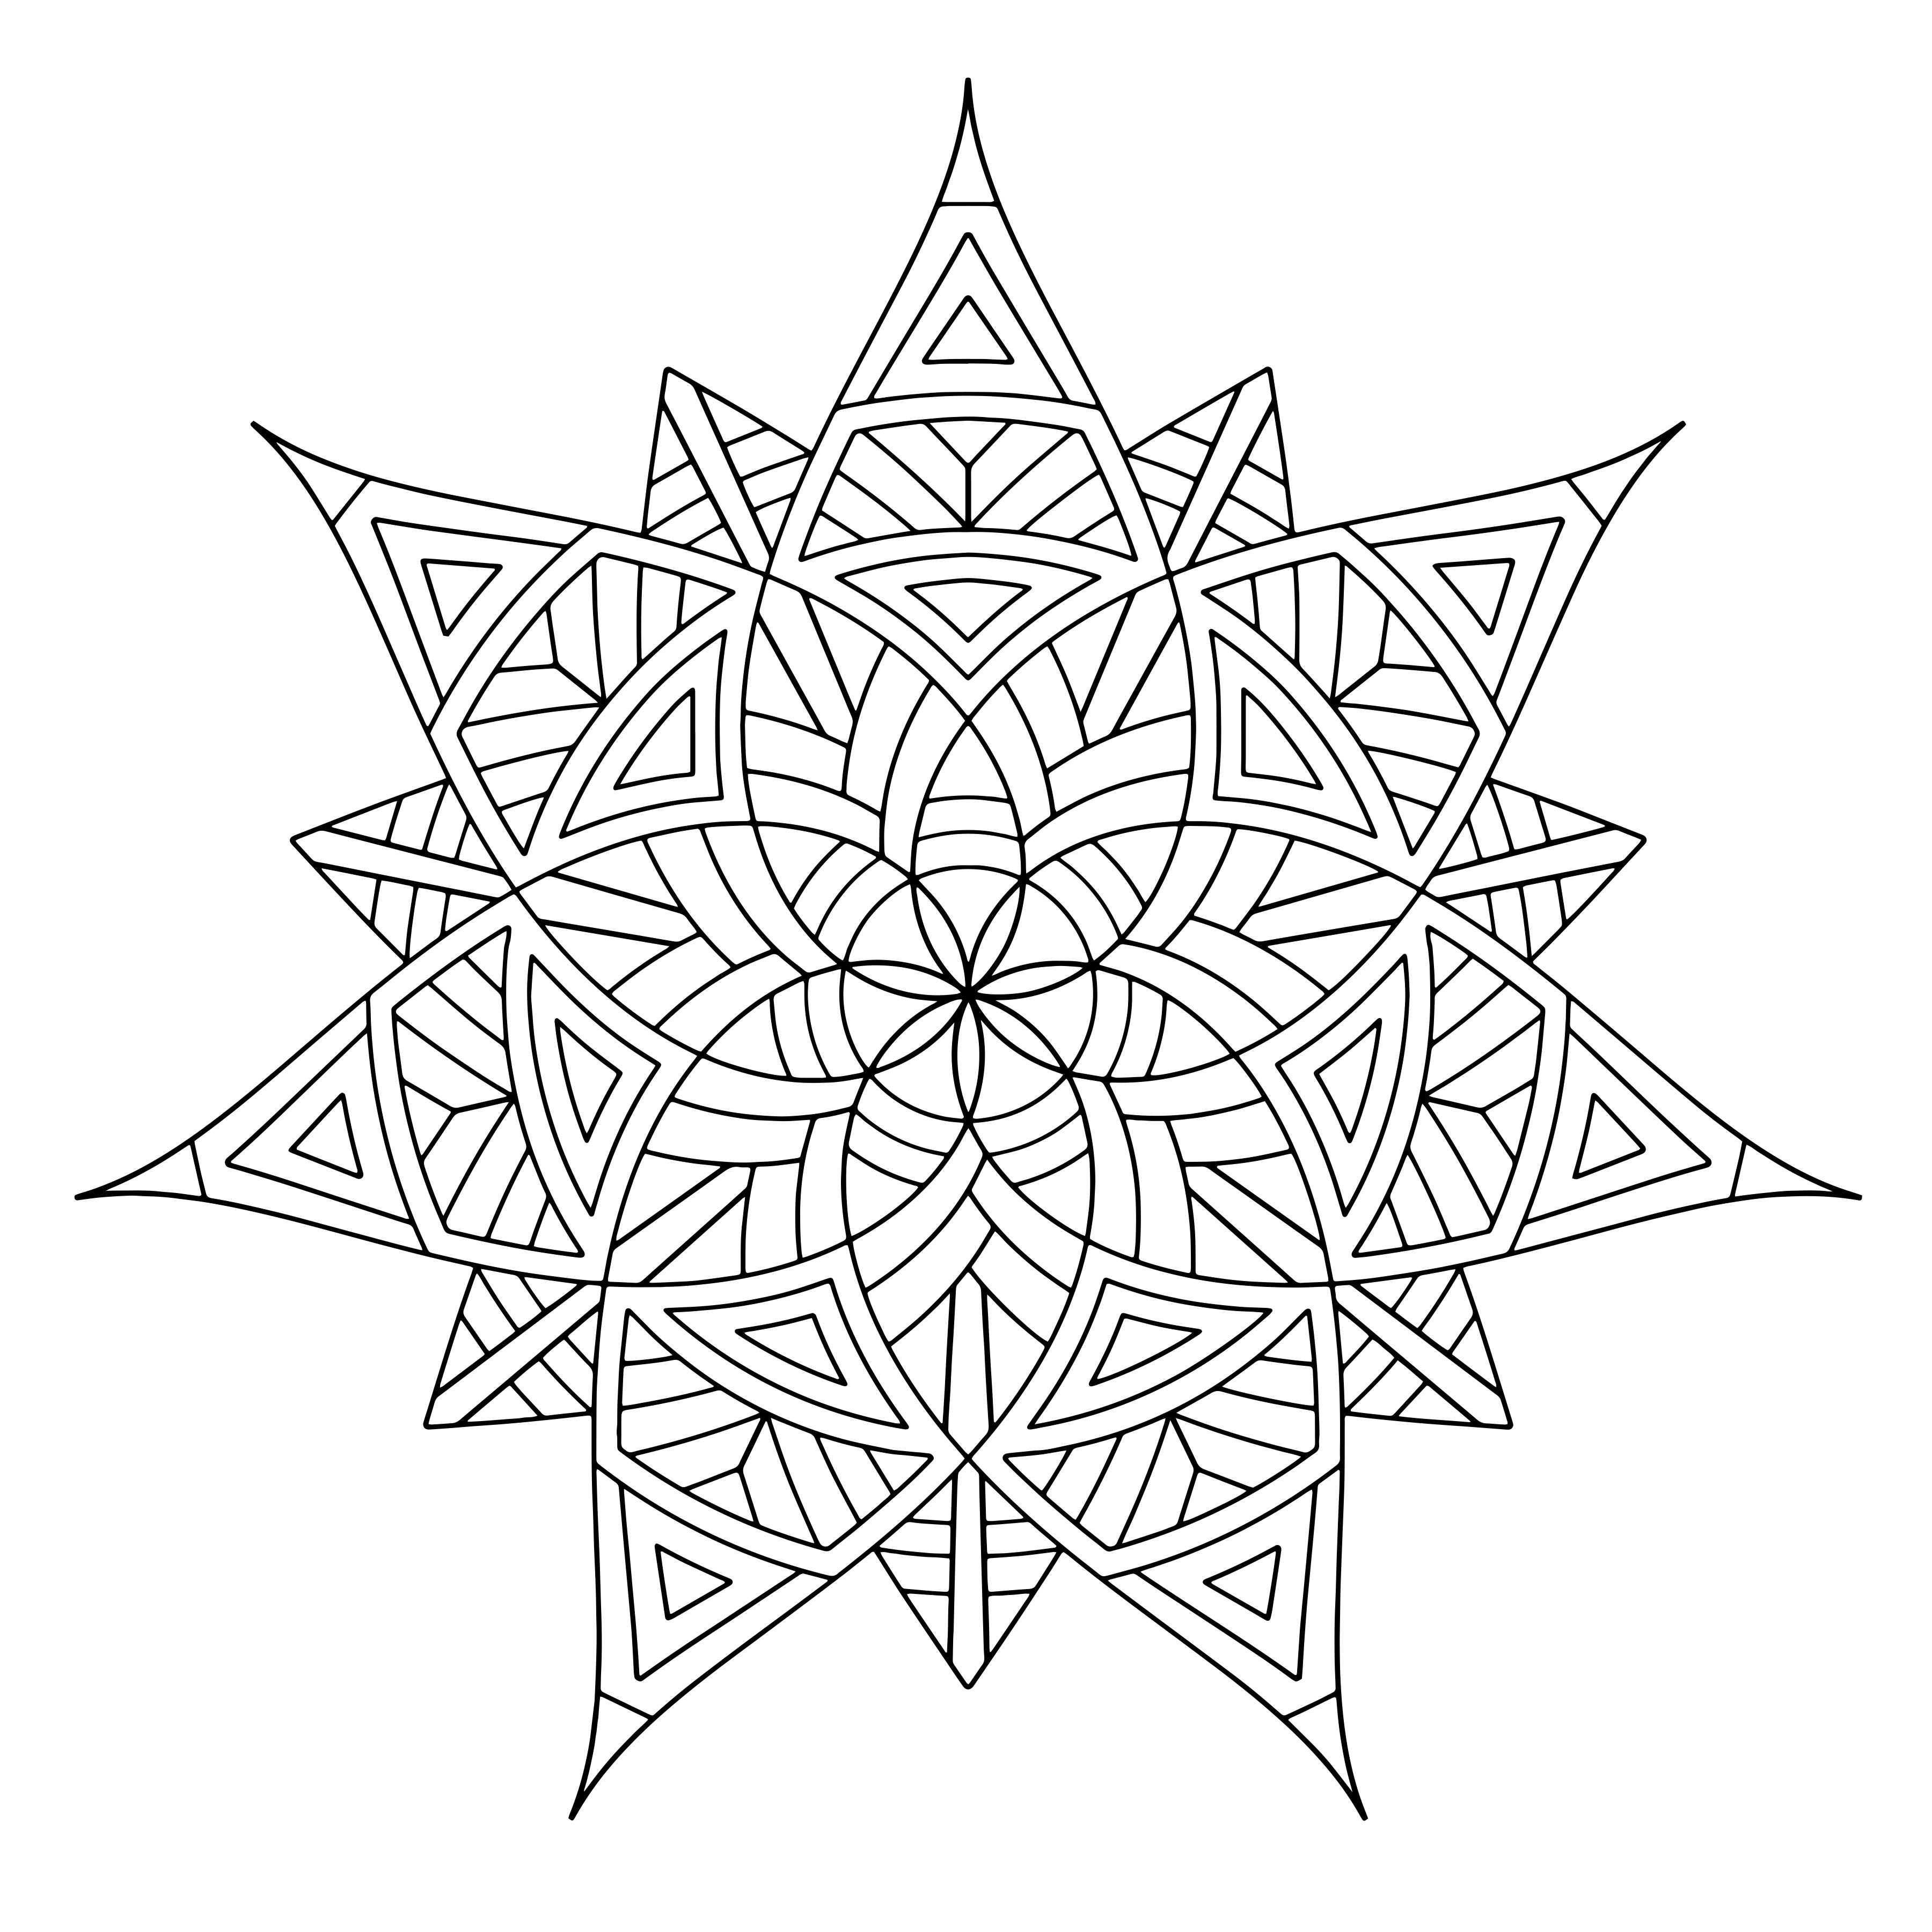 Printable Geometric Coloring Pages
 Free Printable Geometric Coloring Pages for Adults